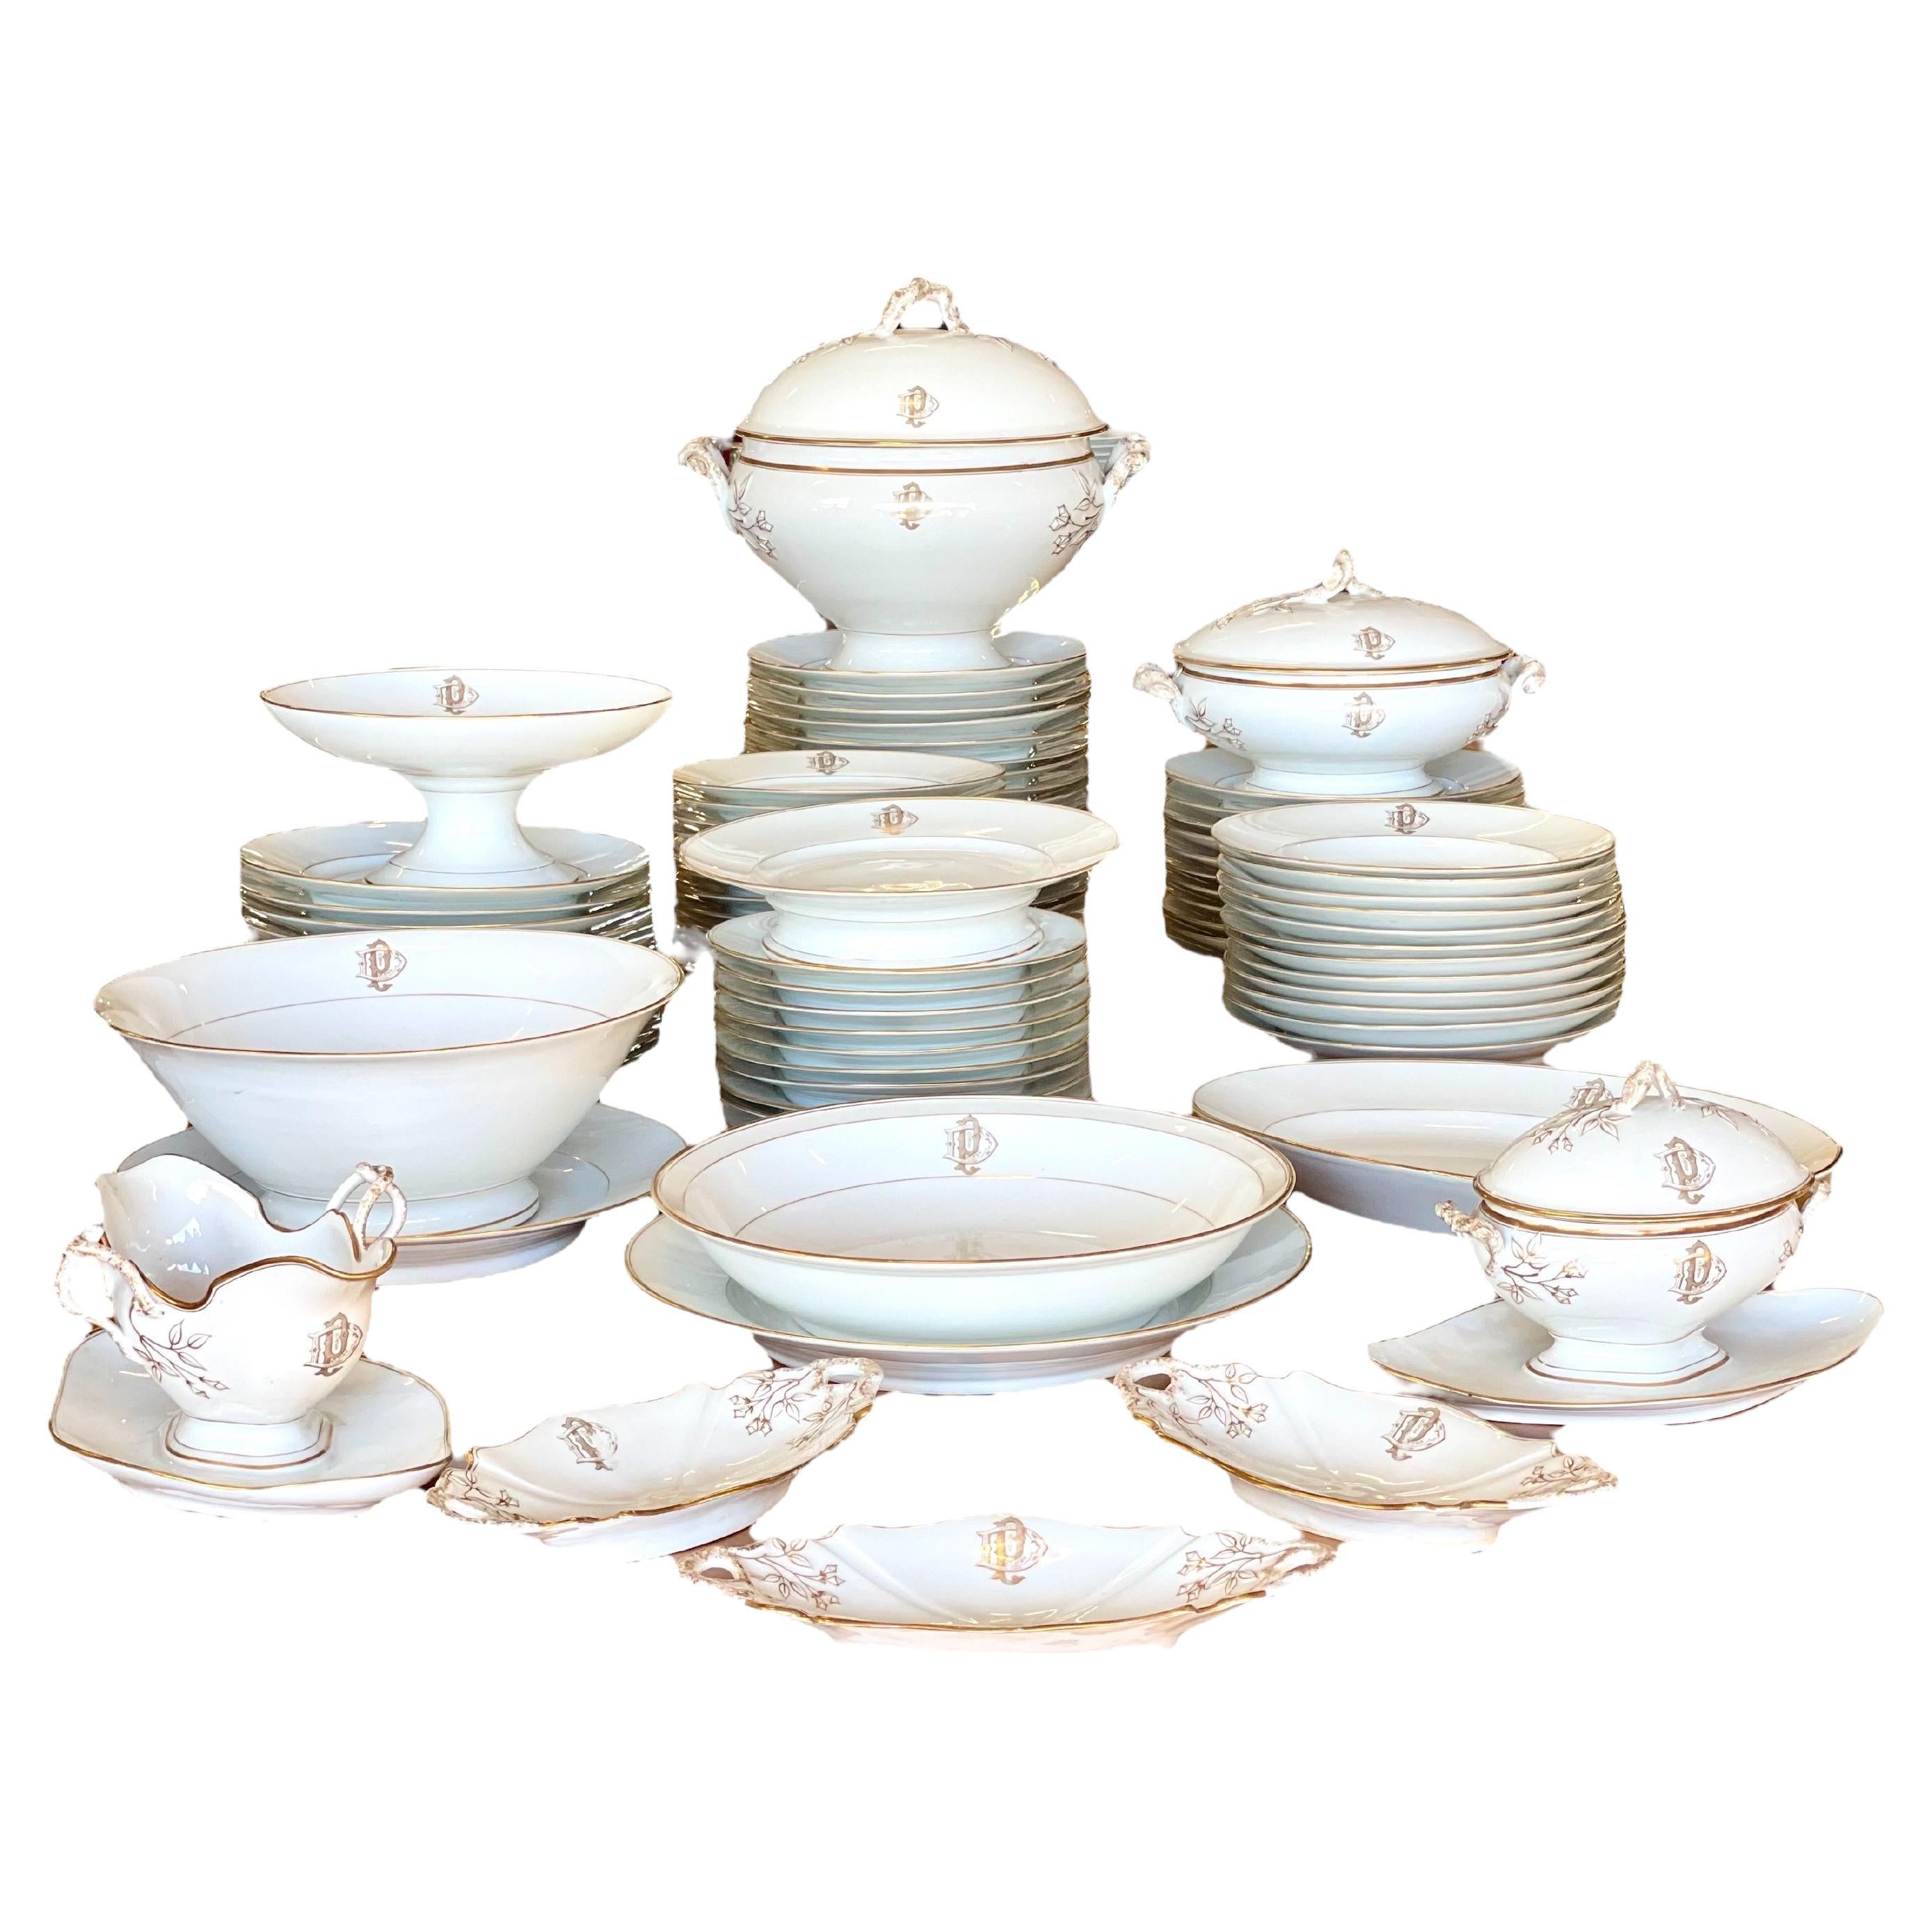 Limoges Porcelain Set of 50 Piece Dinner Service with Gilt Edges and Monogramme